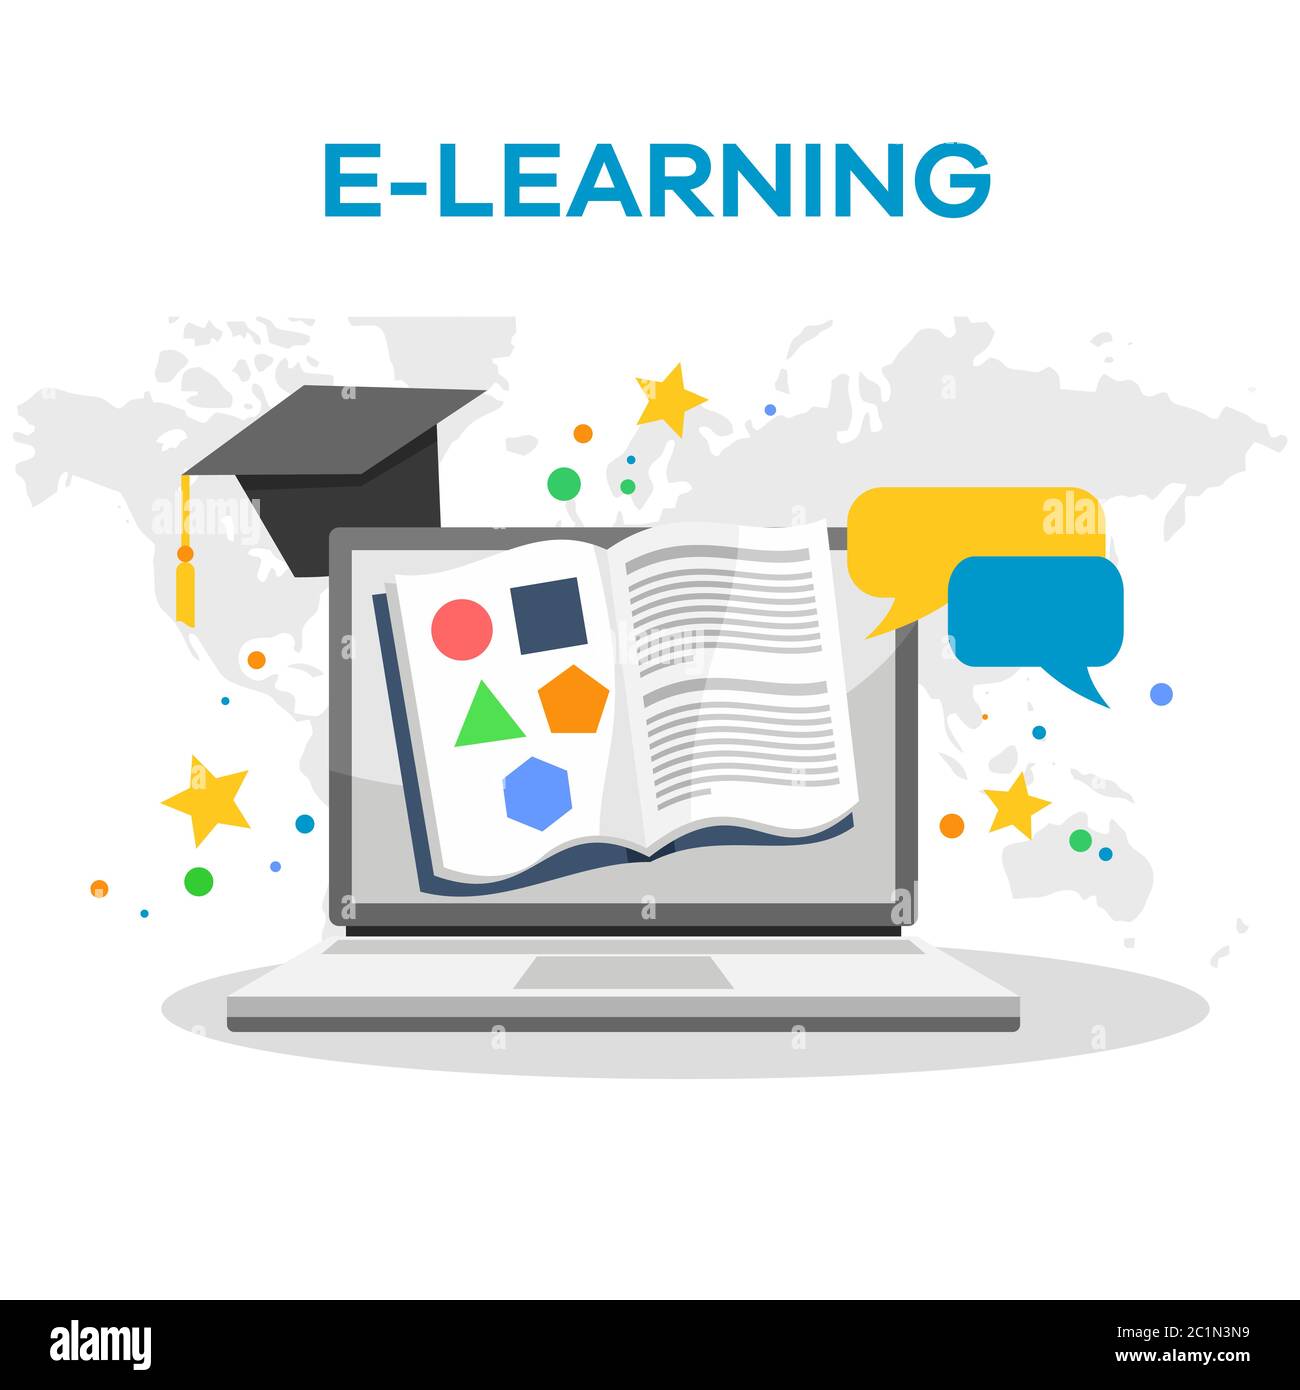 Vector illustration of online learning. Suitable for promotion of E-Learning services, distance teaching, and learning web backgrounds. Stock Vector